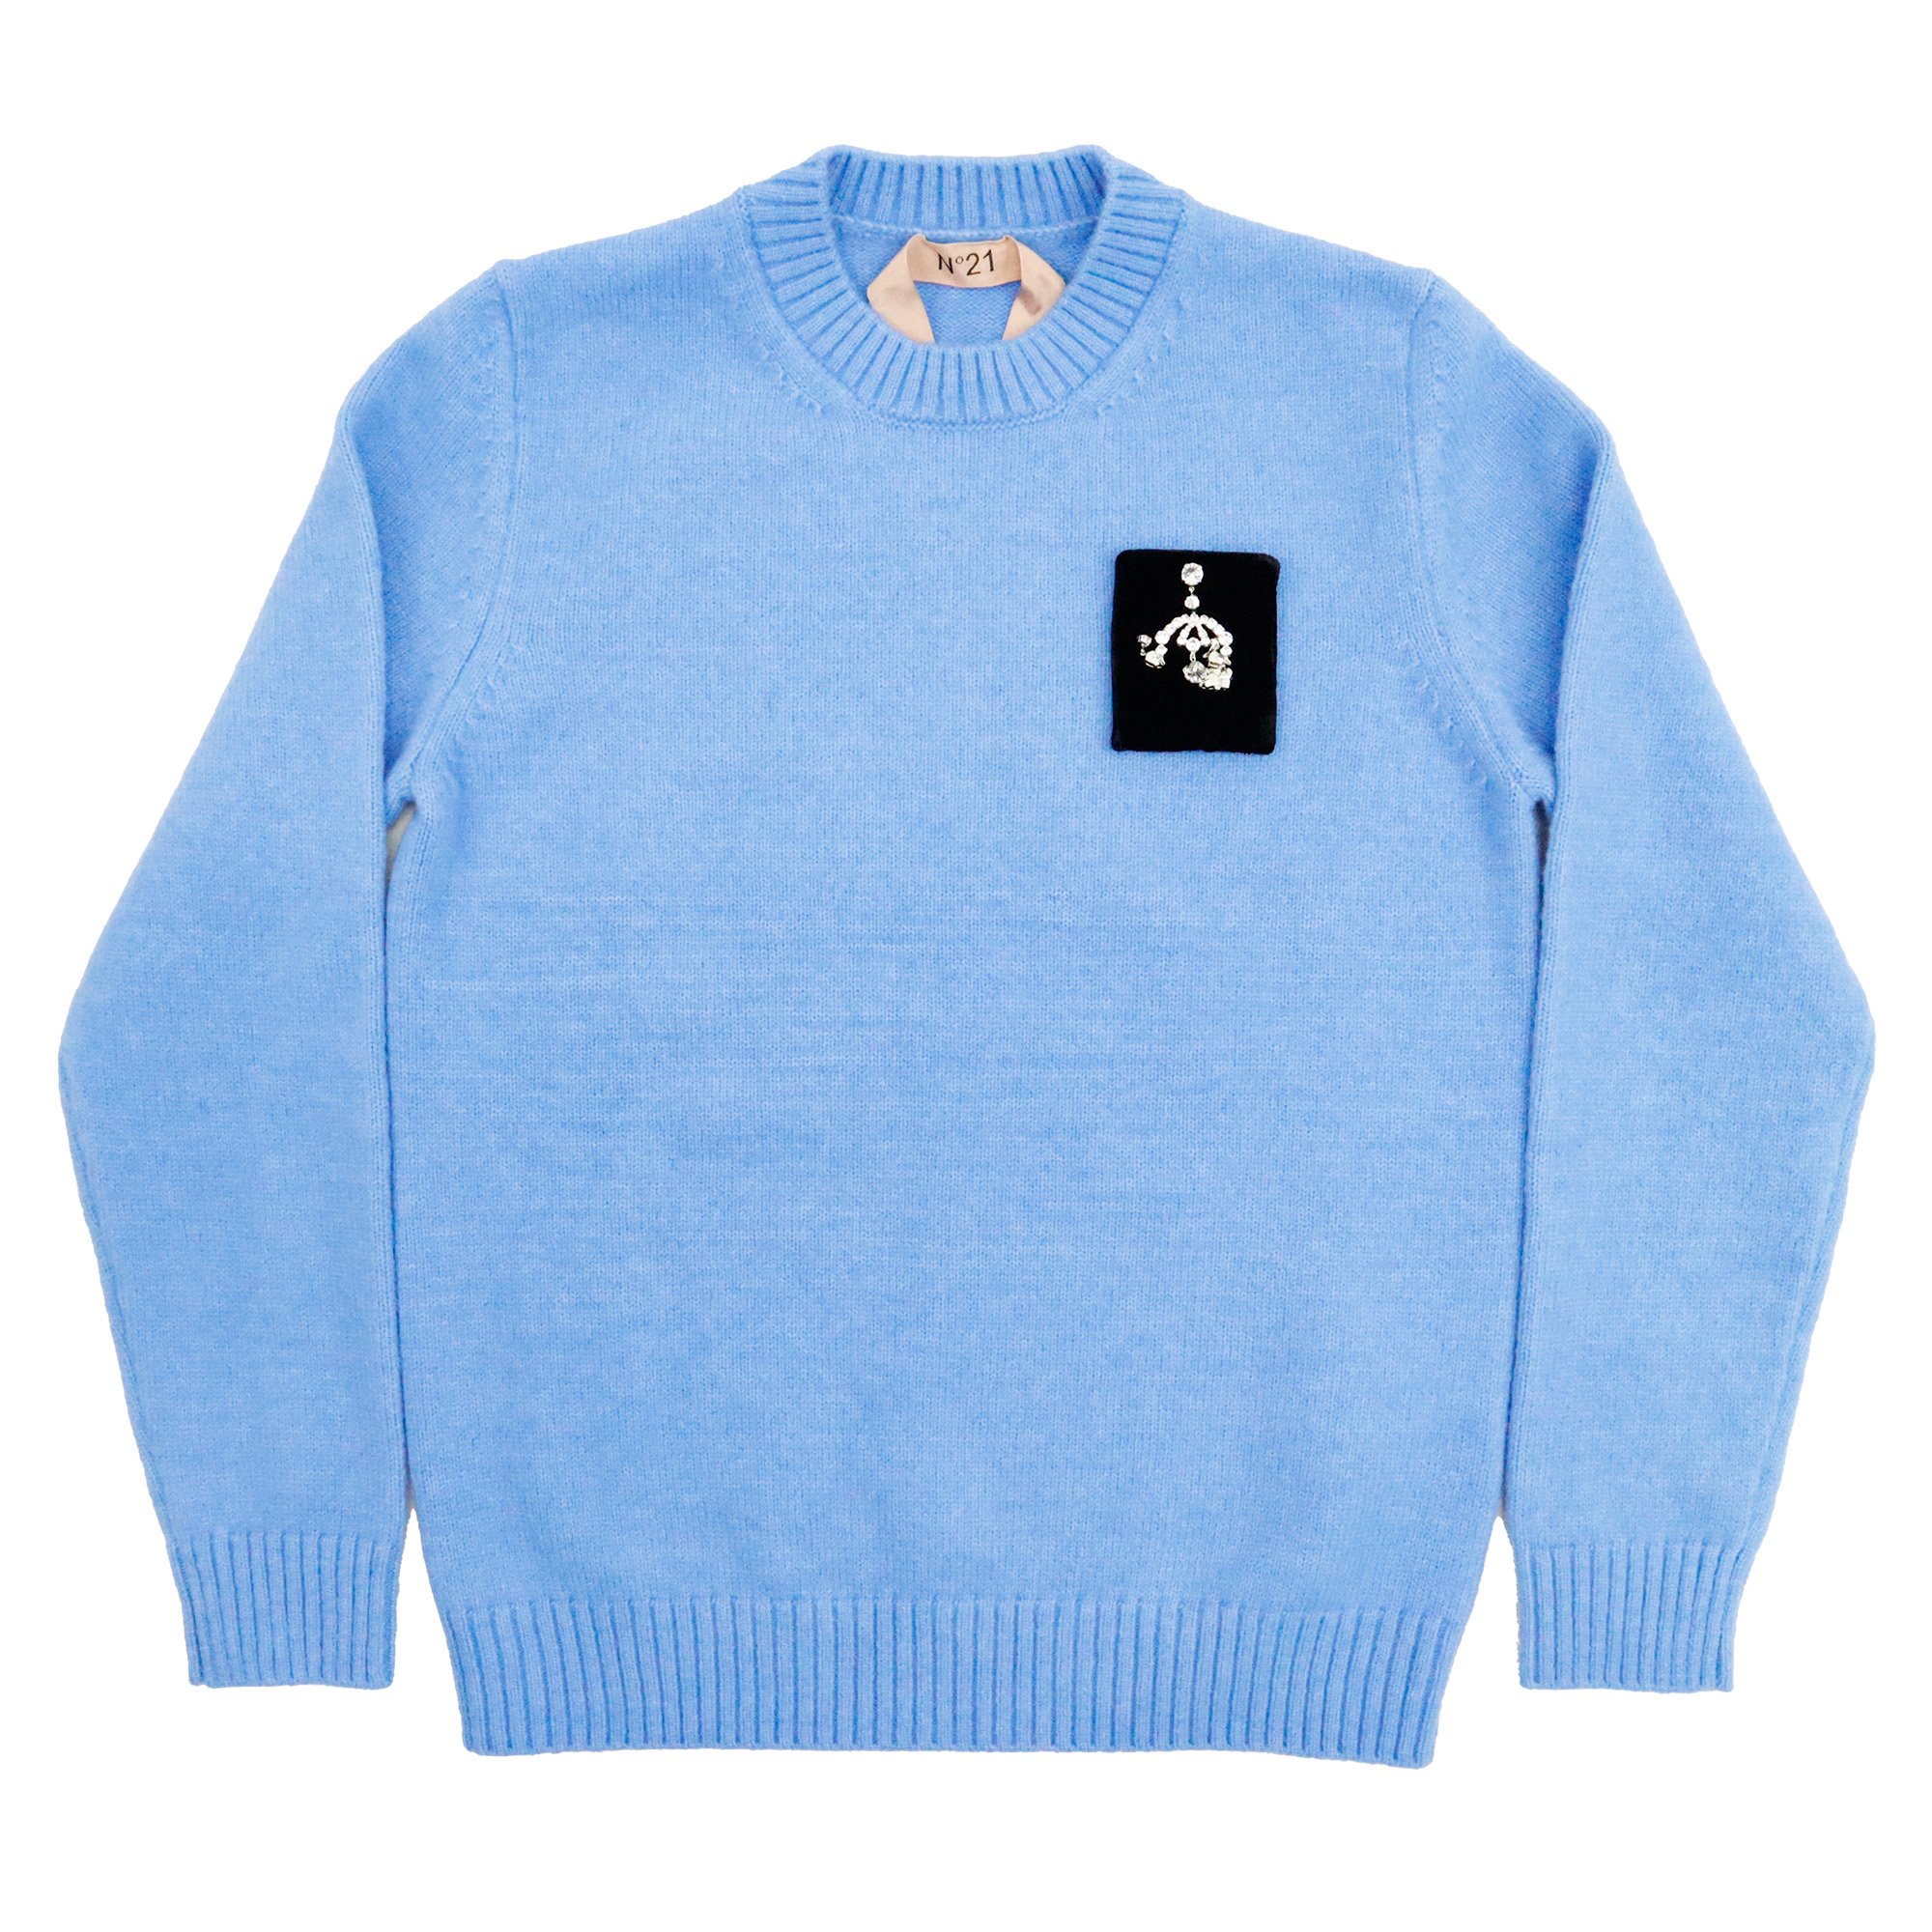 <img class='new_mark_img1' src='https://img.shop-pro.jp/img/new/icons47.gif' style='border:none;display:inline;margin:0px;padding:0px;width:auto;' />N21 L/S KNIT30%OFF